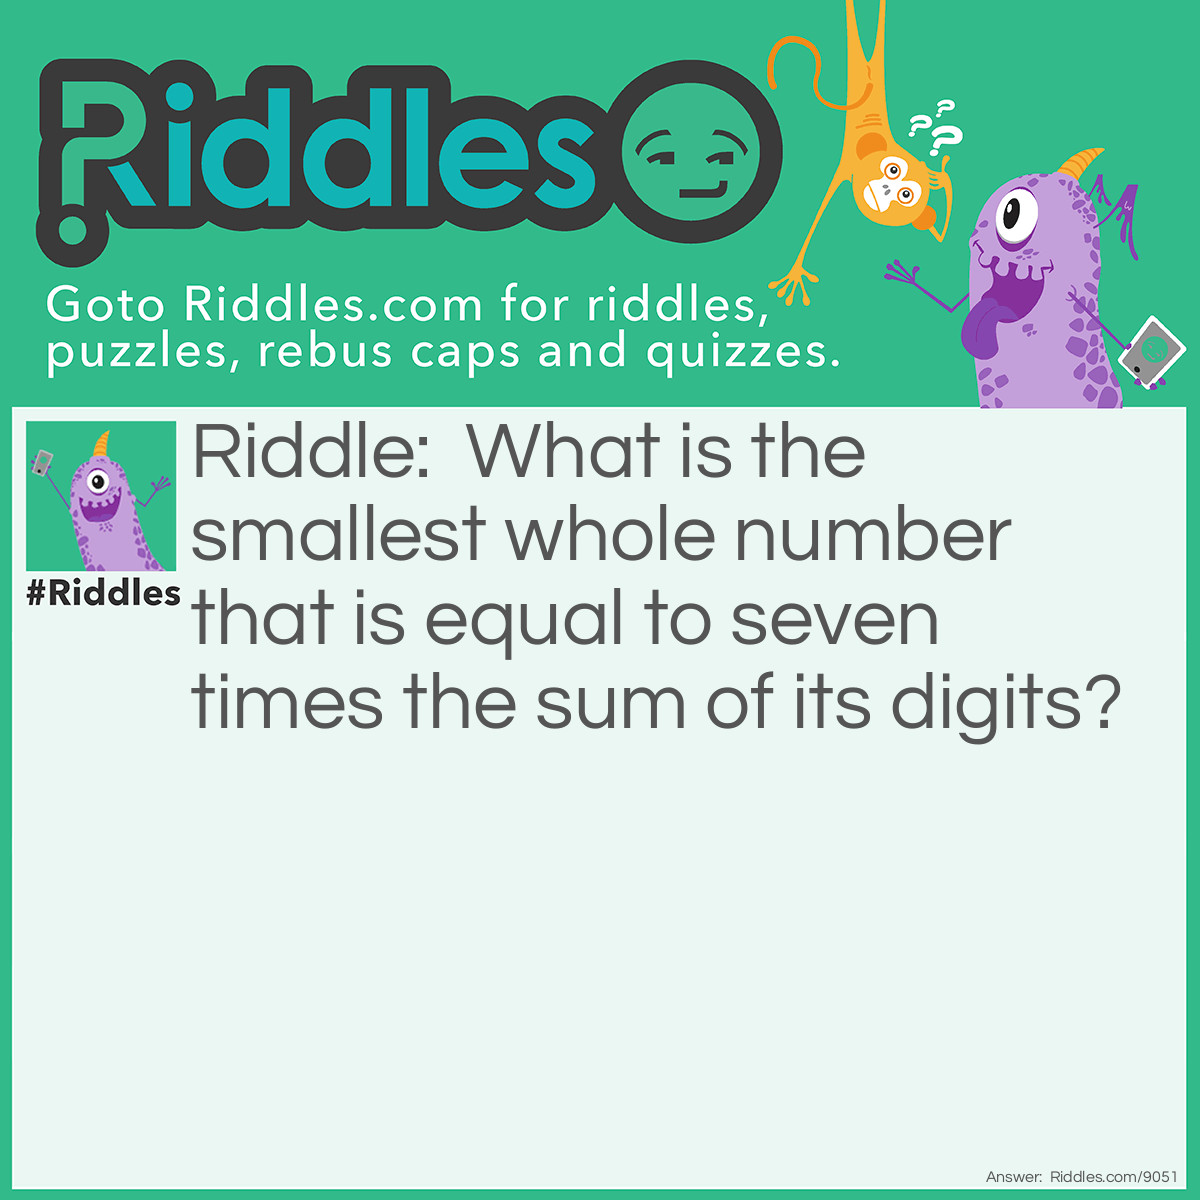 Riddle: What is the smallest whole number that is equal to seven times the sum of its digits? Answer: The answer to this math riddle is 21. You probably just guessed to answer this math riddle, which is fine, but you can also work it out algebraically. The two-digit number ab stands for 10a + b since the first digit represents 10s and the second represents units. If 10a + b = 7(a + b), then 10a + b = 7a + 7b, and so 3a = 6b, or, more simply, a = 2b. That is, the second digit must be twice the first. The smallest such number is 21.